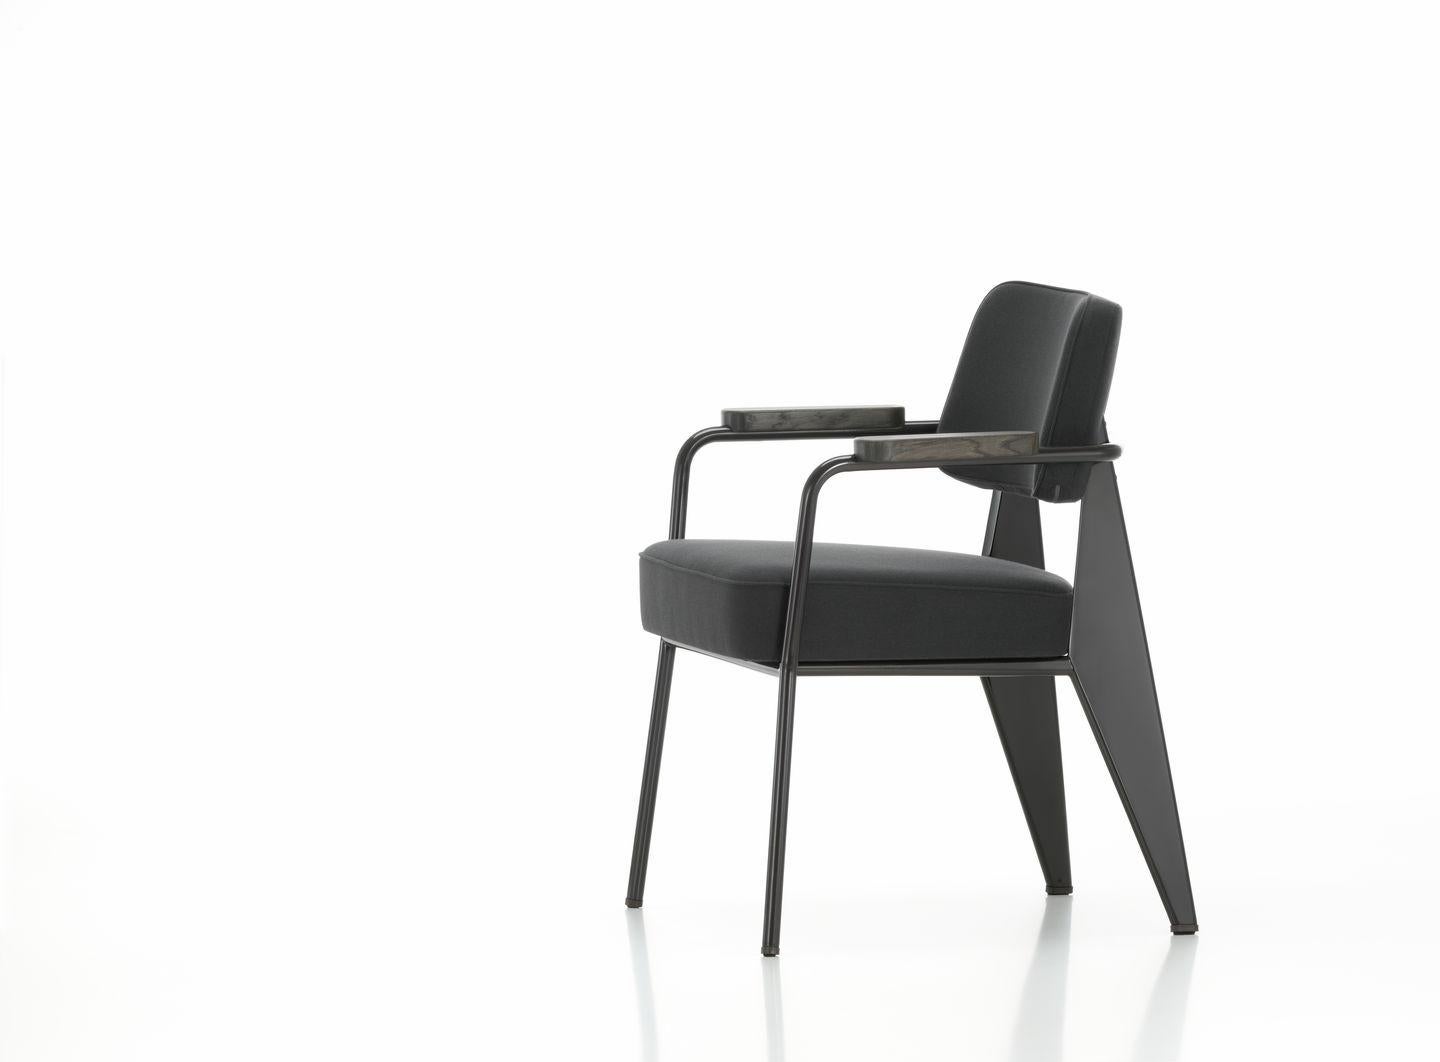 Swiss Jean Prouvé Fauteuil Direction Chair by Vitra